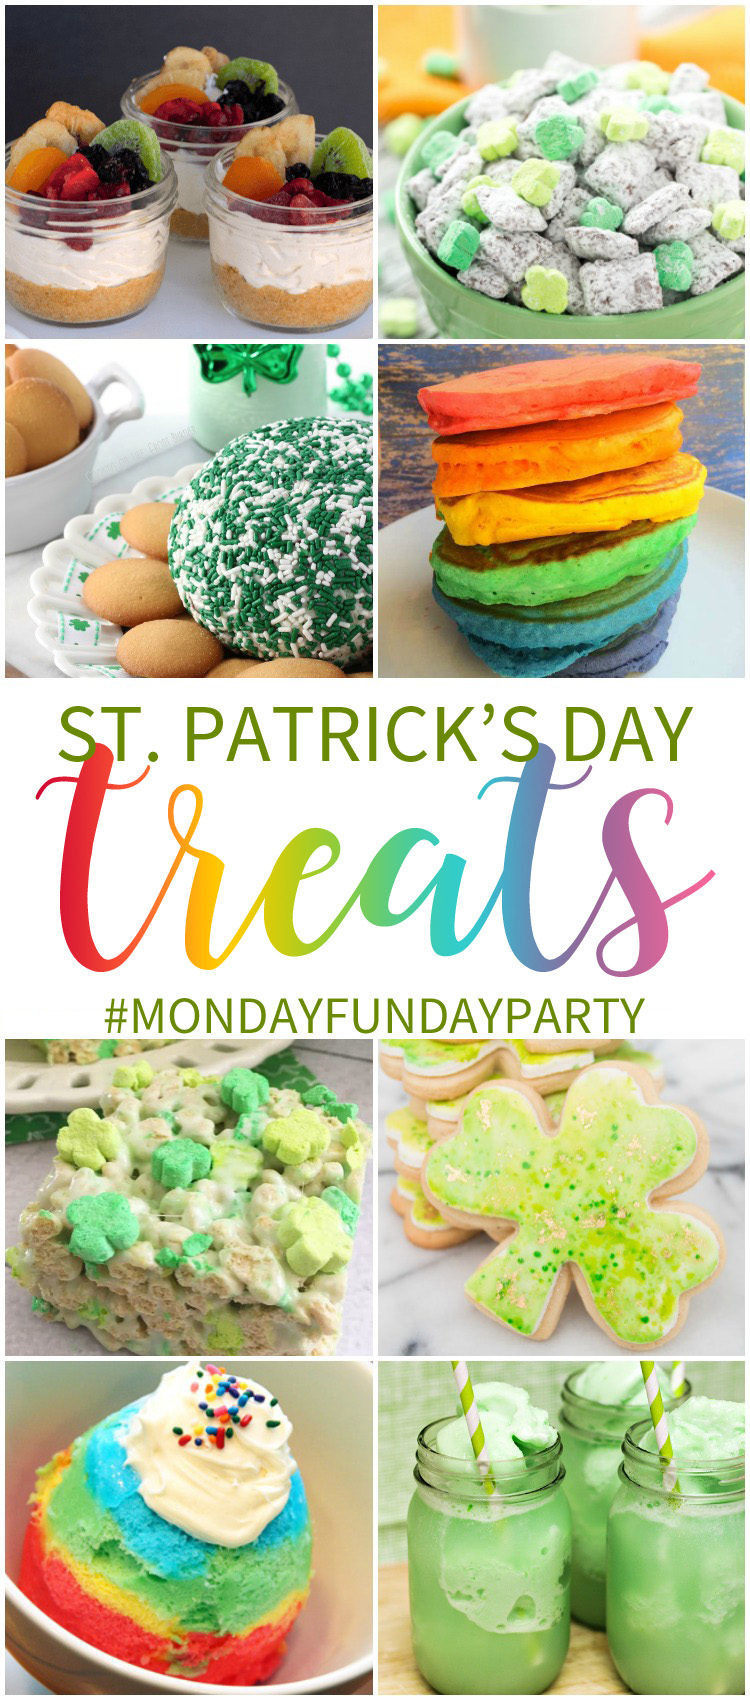 St Patrick's Day Party Food
 8 Great St Patrick s Day Recipe Treat Ideas